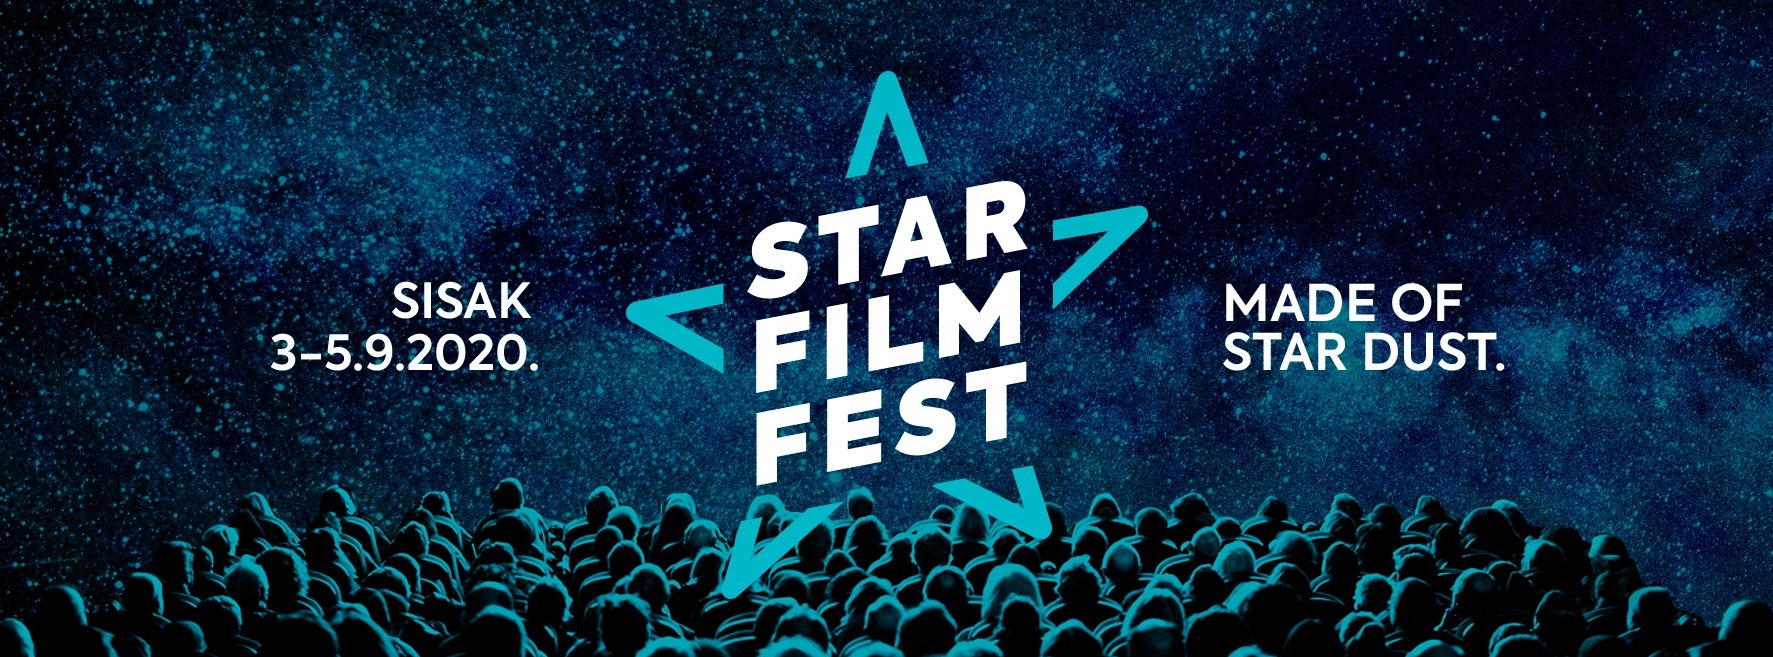 You are currently viewing 7. Star Film Fest